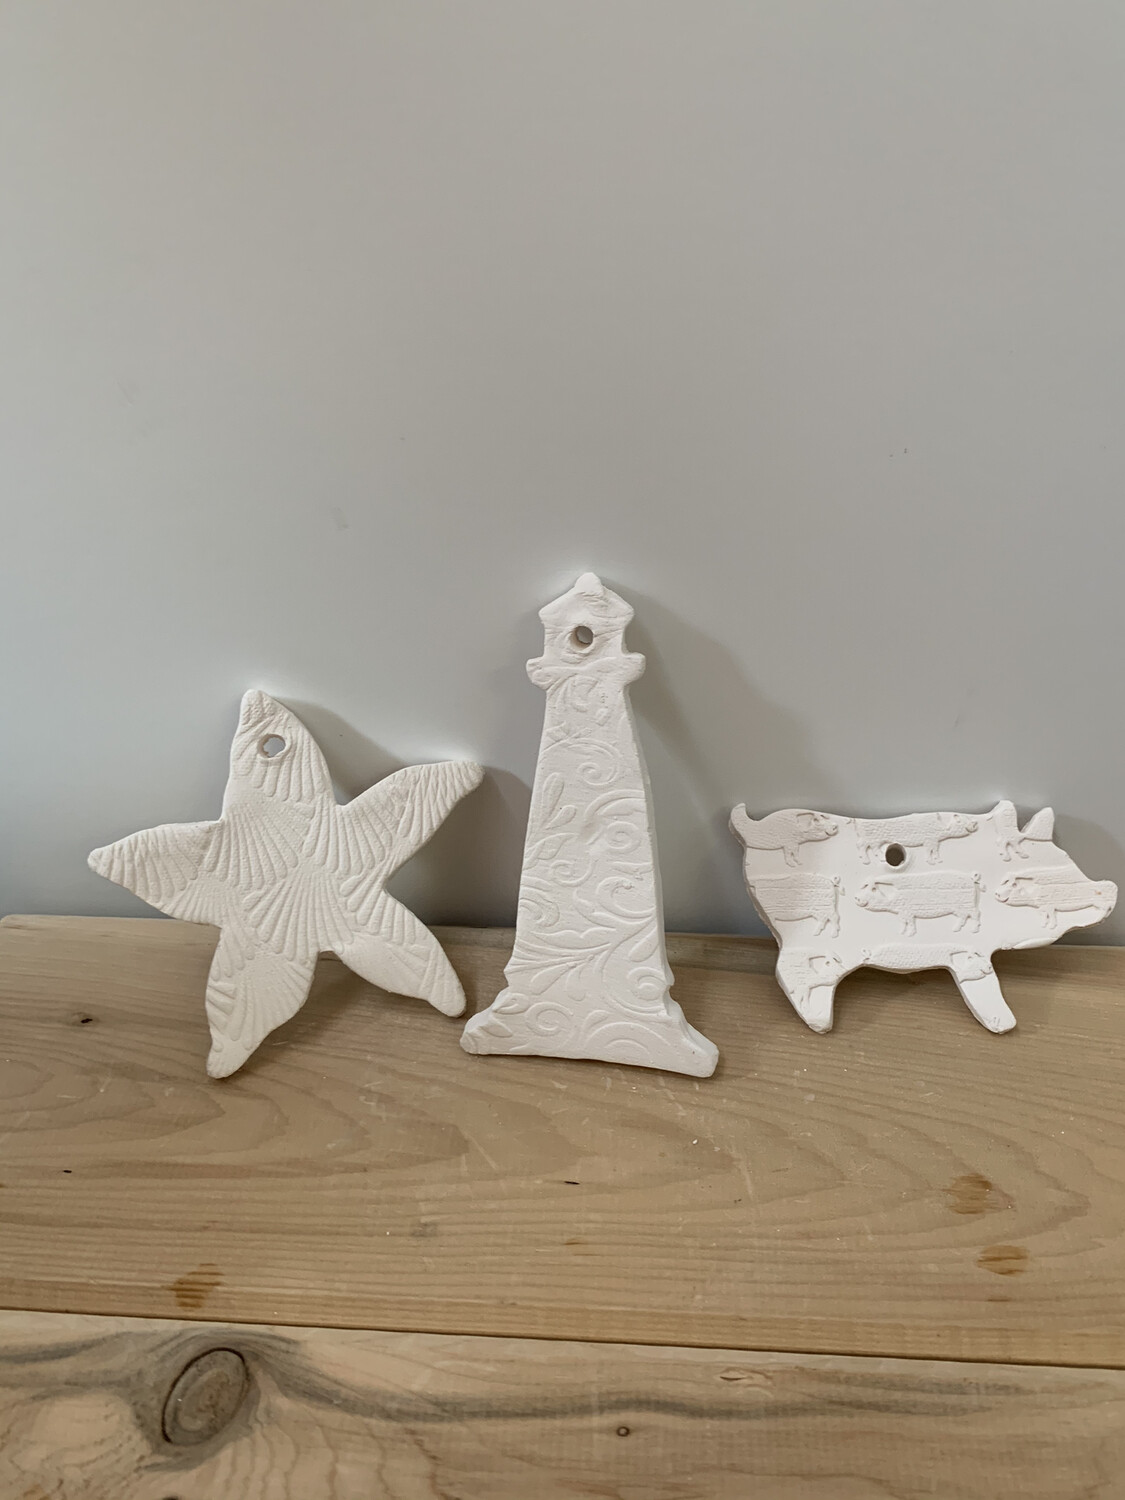 Paint Your Own Pottery - Ceramic
- Set of 3 Congress Hall Cape May NJ Christmas Ornaments - Pig, Lighthouse, Starfish